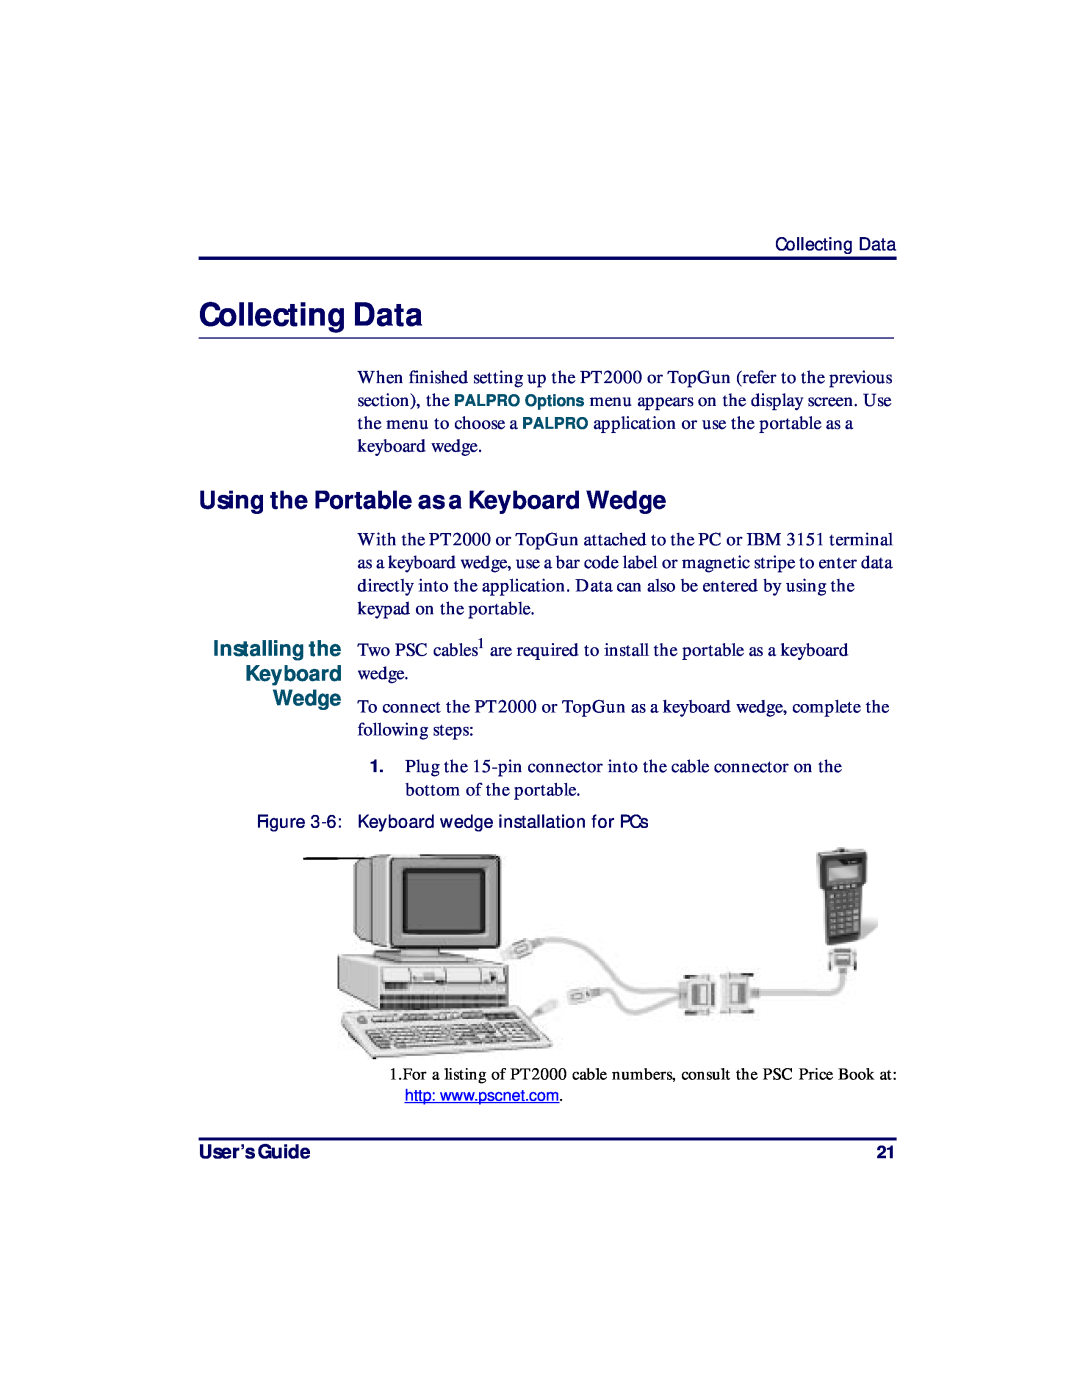 PSC PT2000, TopGun Collecting Data, Using the Portable as a Keyboard Wedge, Installing the Keyboard Wedge, User’s Guide 